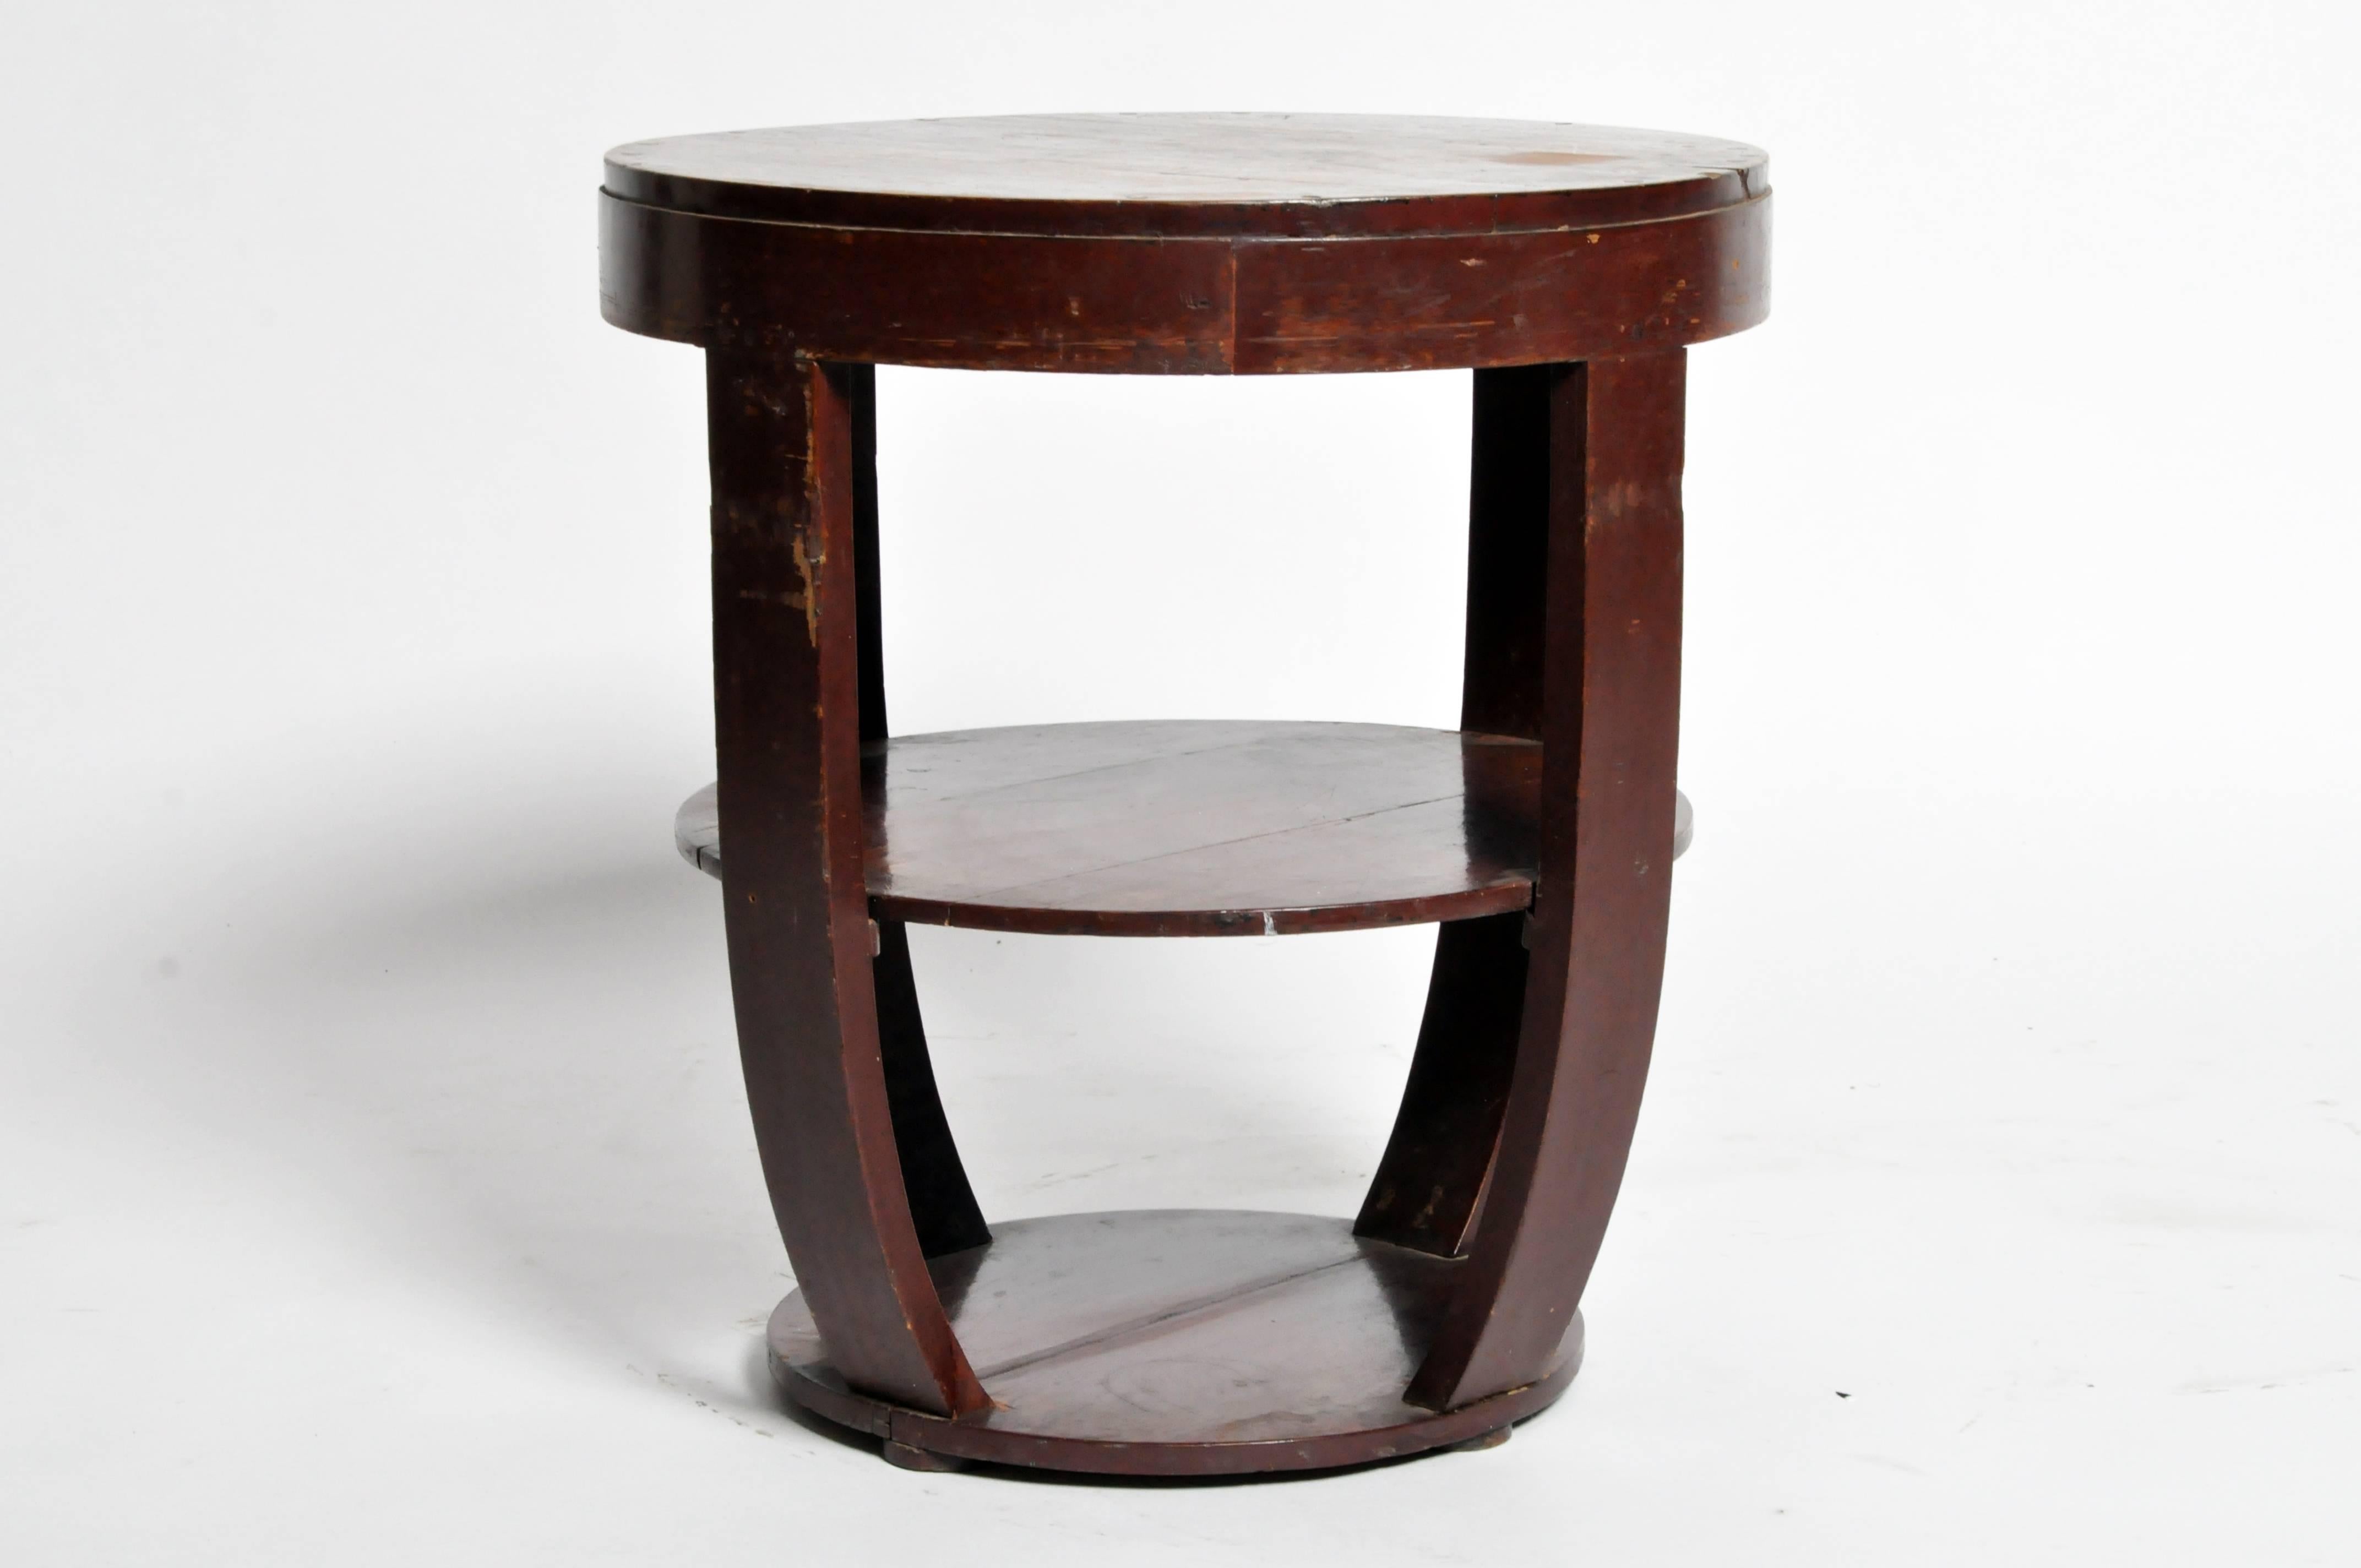 This round British Colonial Art Deco side table is made from teak wood with centre shelf made of teak wood with original varnish from Rangoon, Burma.